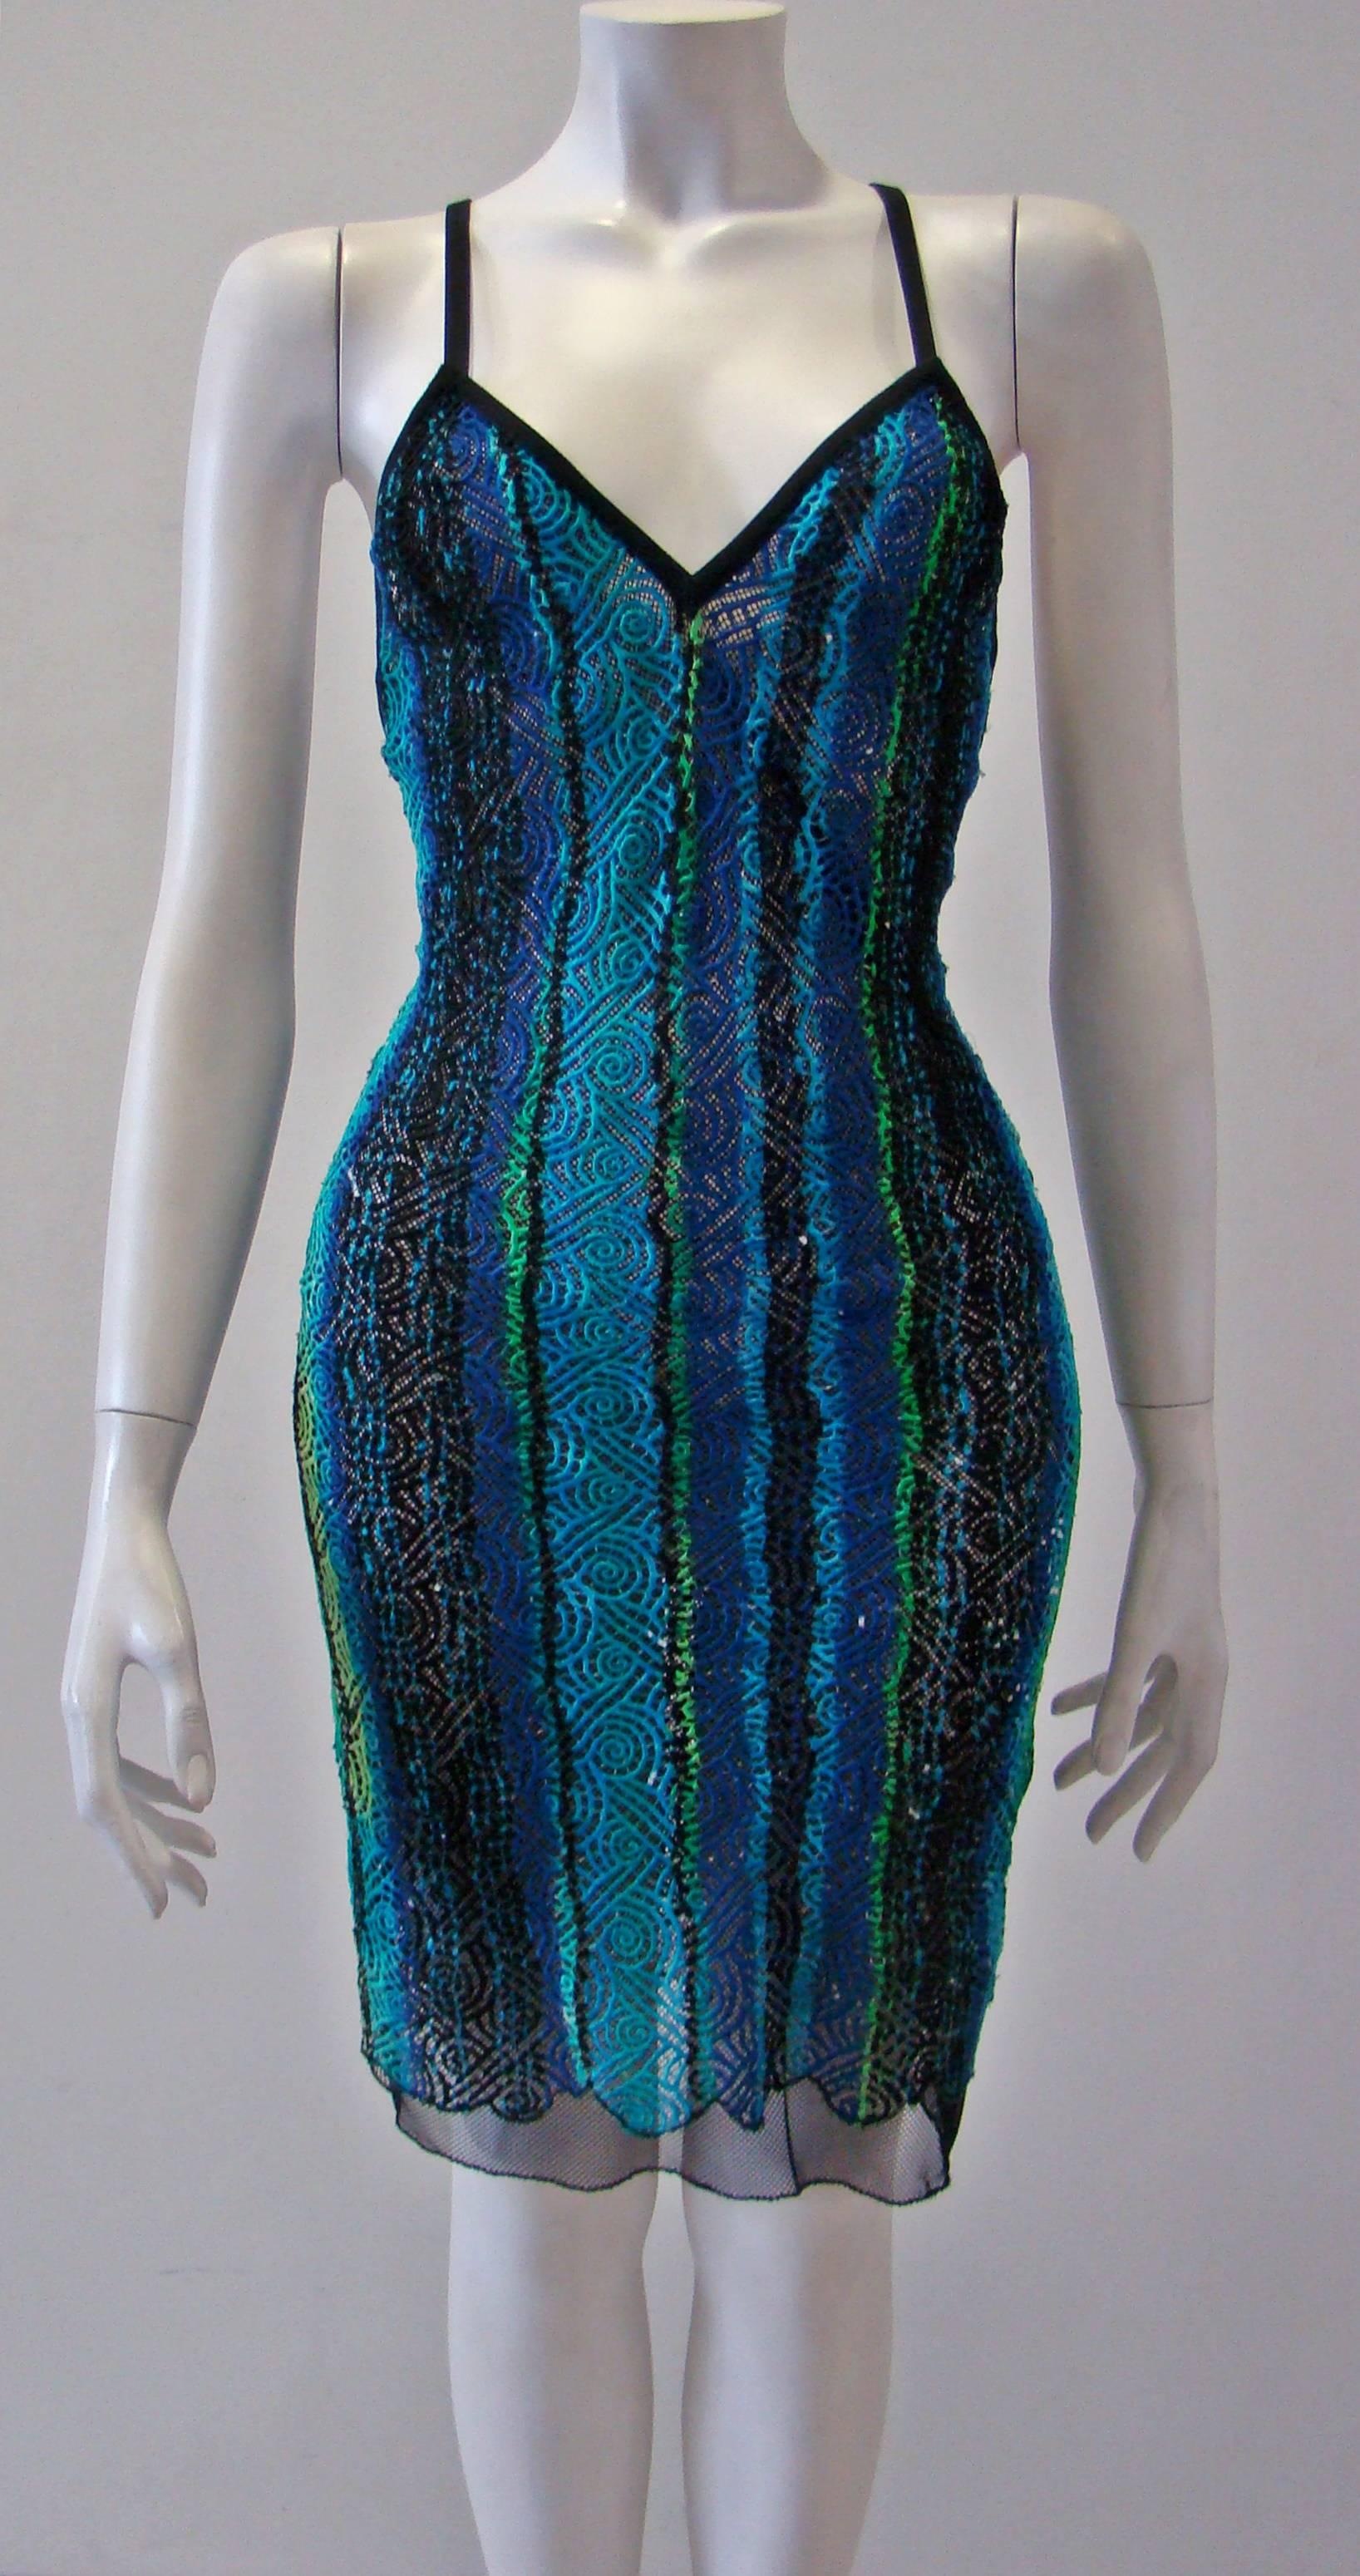 Gianni Versace Couture Multi-Coloured Threaded Dress With Net Spring 1994